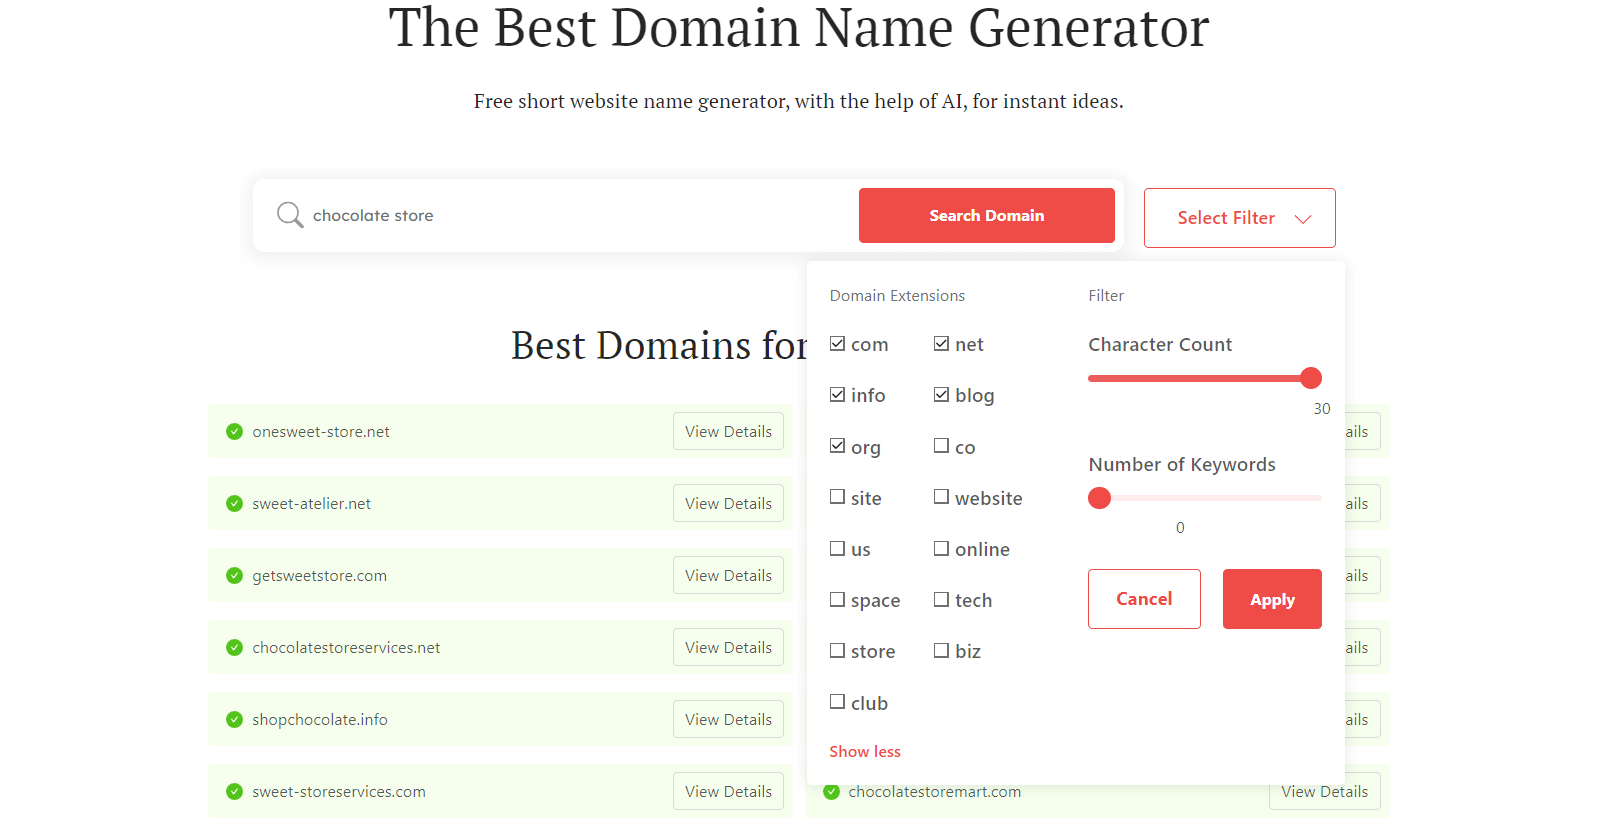 Chocolate business names - DomainWheel search filters for domain extensions, character count, and number of keywords